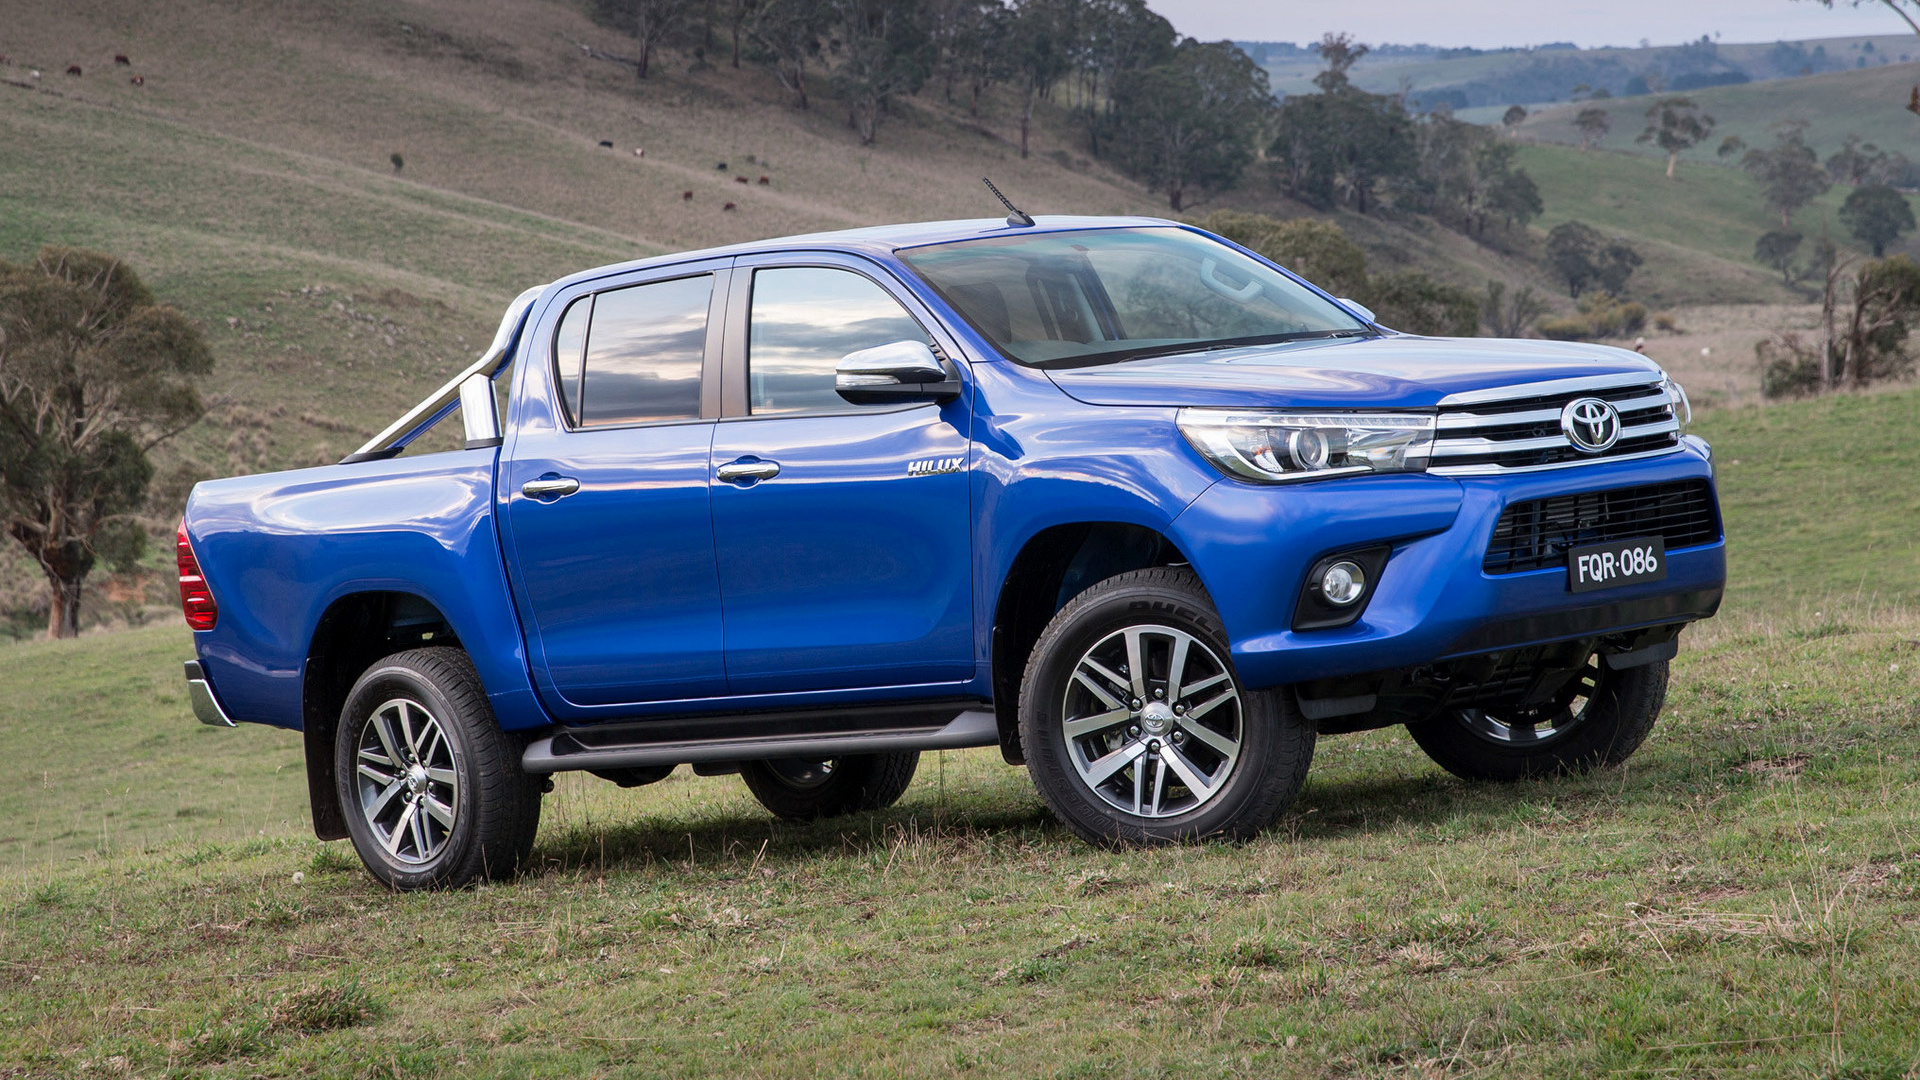 2015 Toyota Hilux SR5 Double Cab AU Wallpapers and HD Images Car 